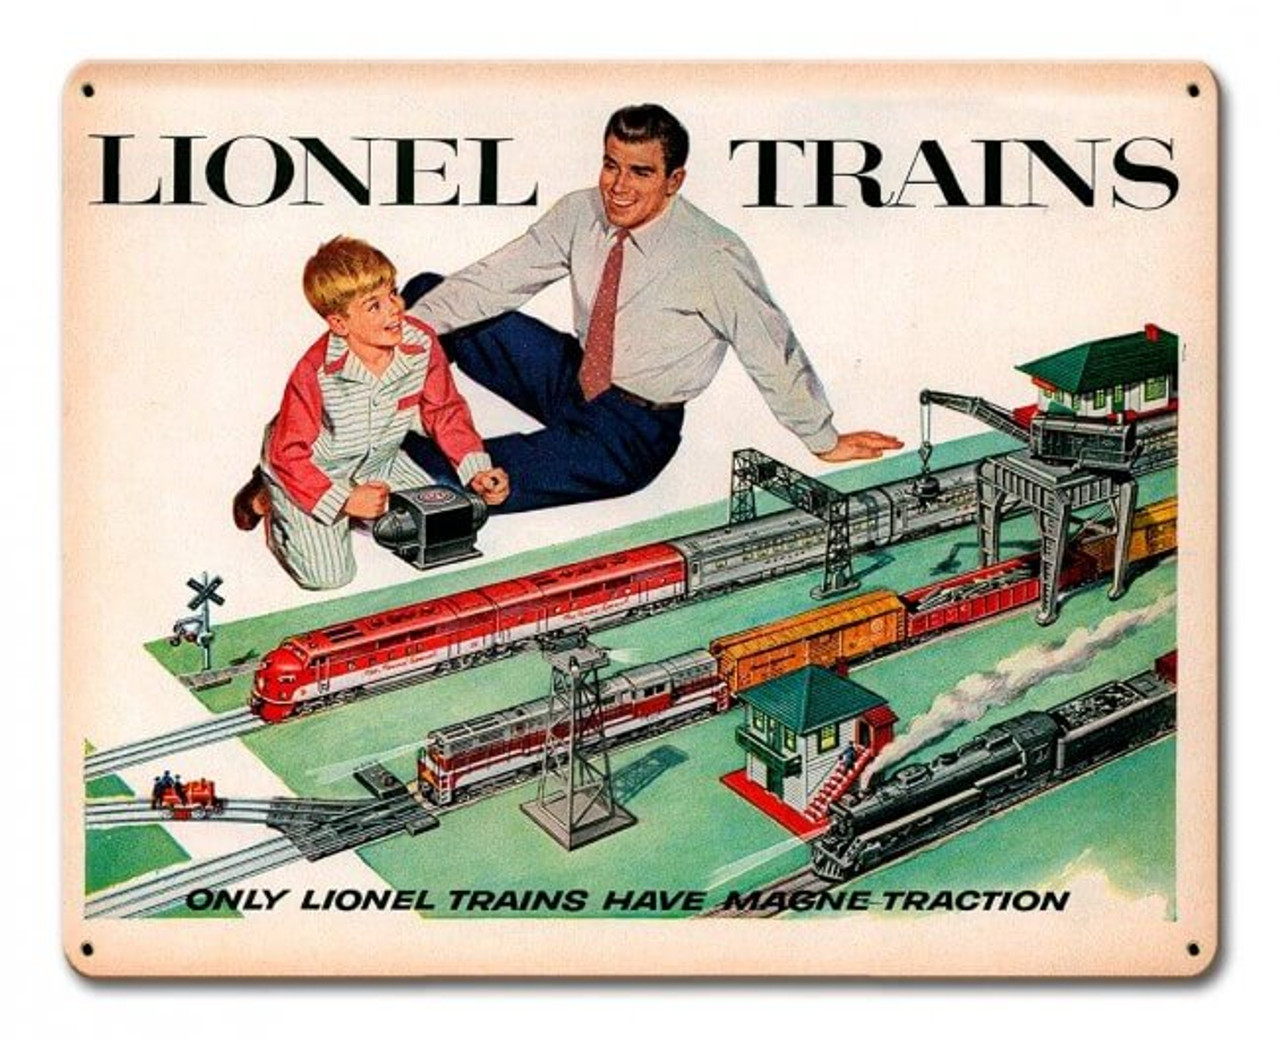 Lionel Trains TIN SIGN Garage Wall Poster Decor 